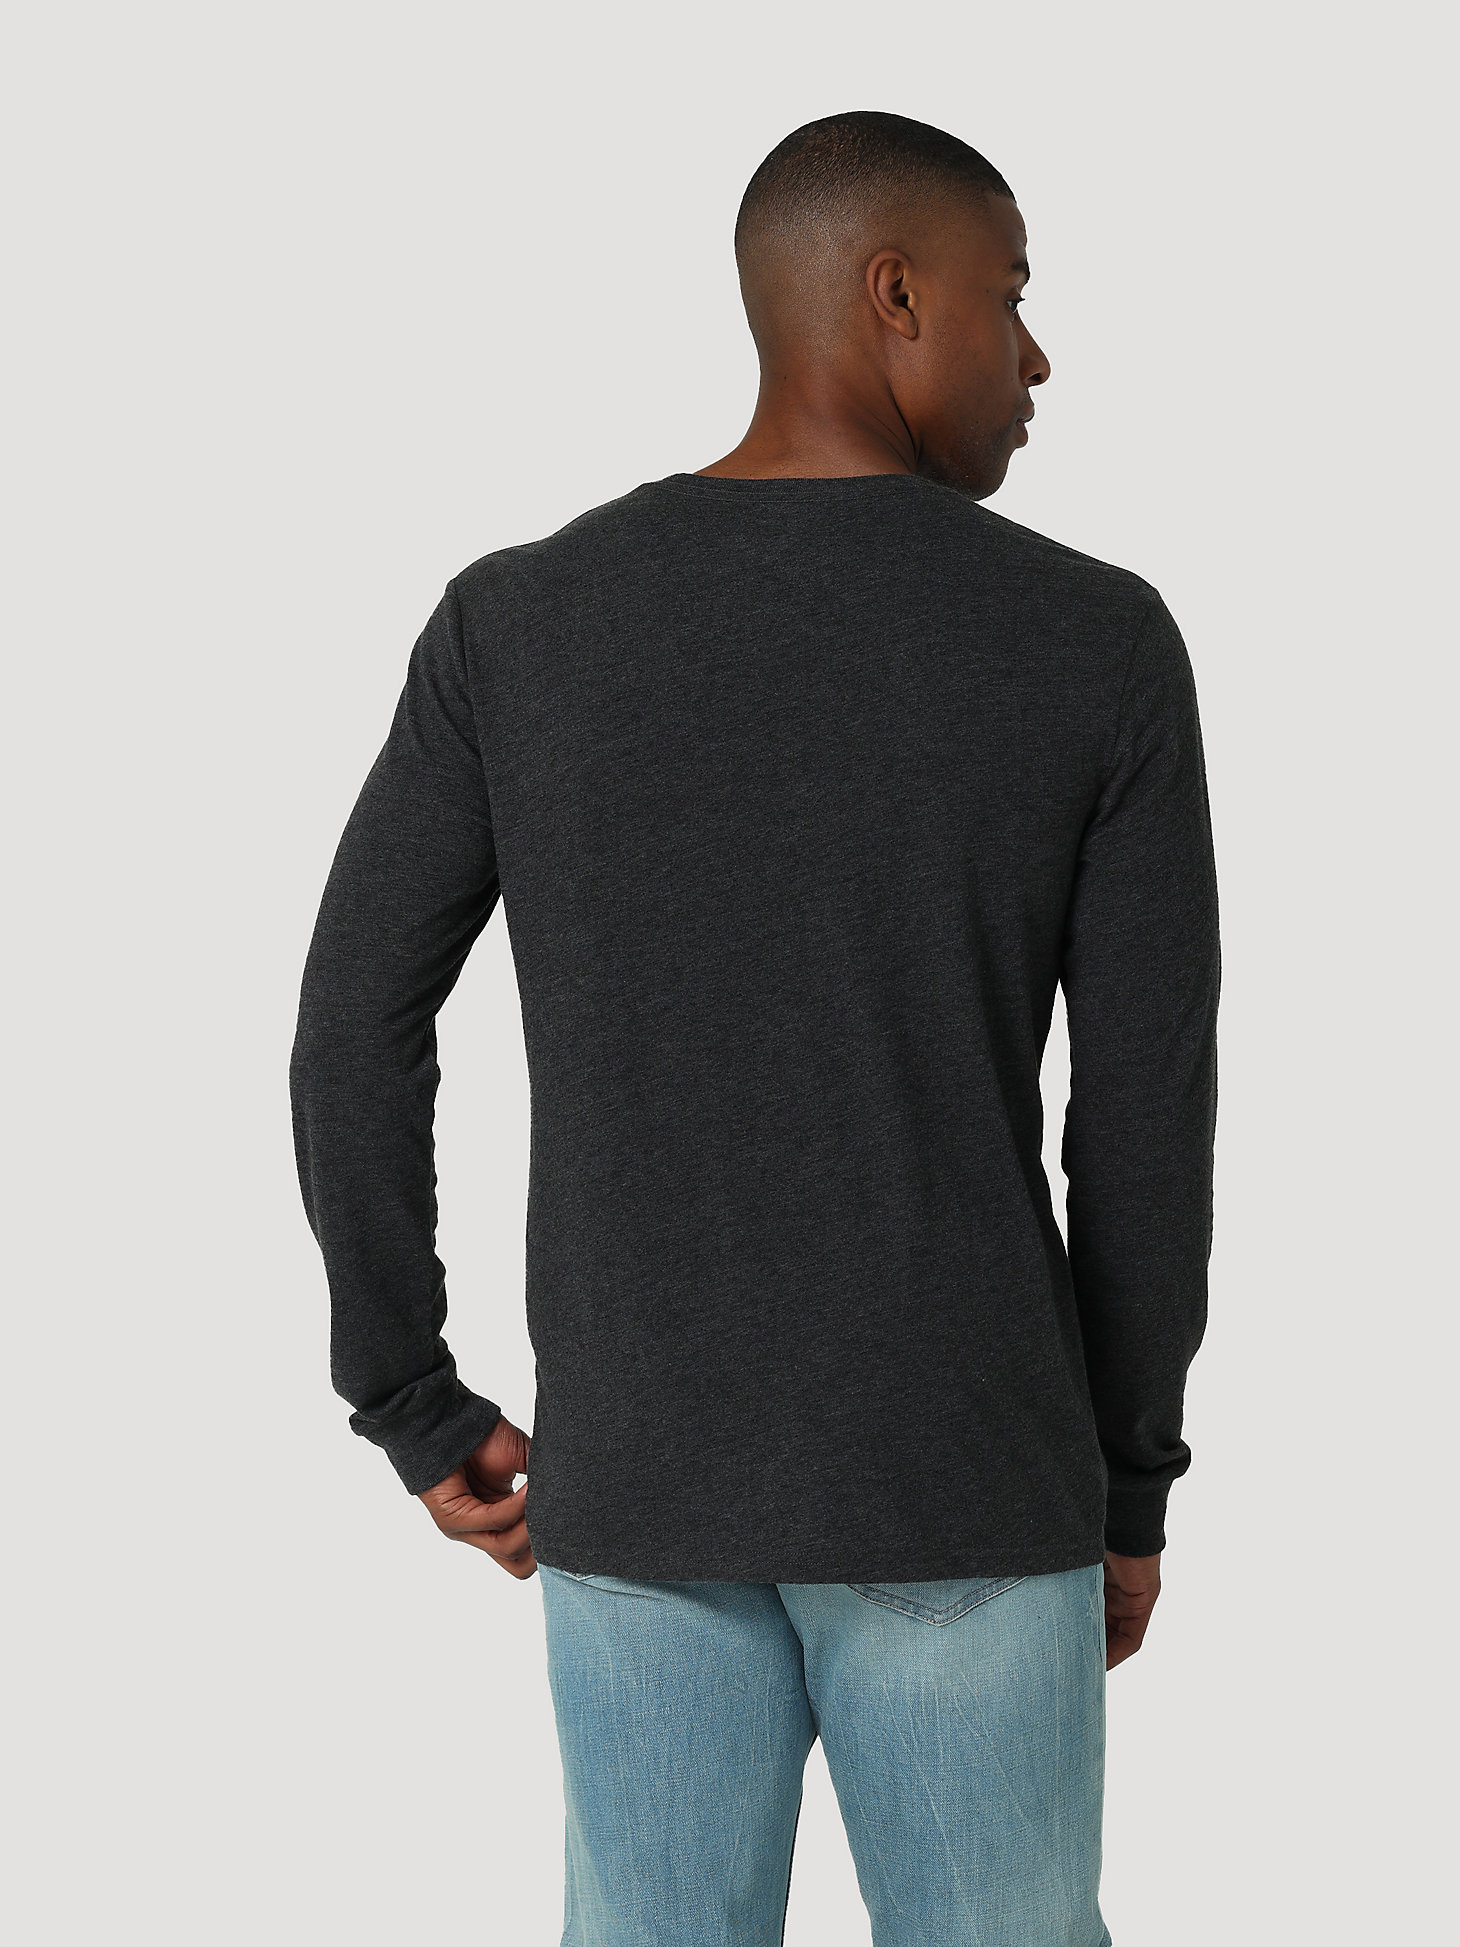 Men's Long Sleeve Wrangler Mexican Flag T-Shirt in Charcoal Heather alternative view 1